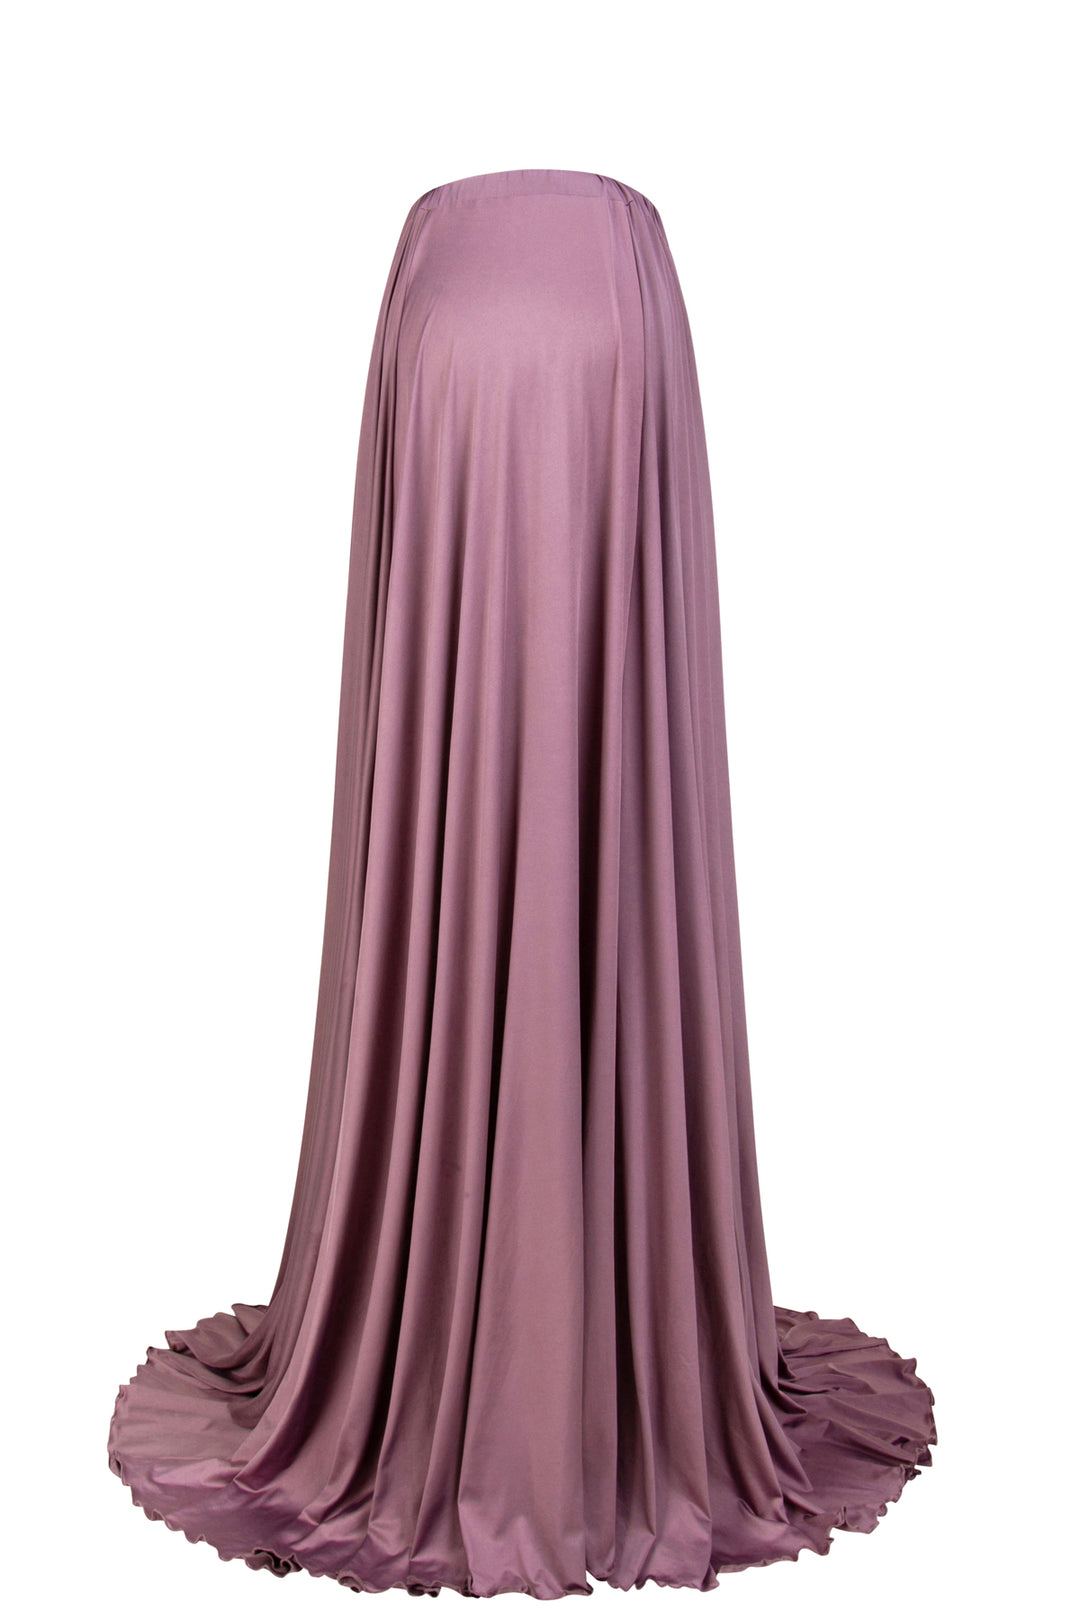 Smokey Amethyst Luxe Jersey™ {Zoe} Full Circle Maternity Skirt by Chicaboo